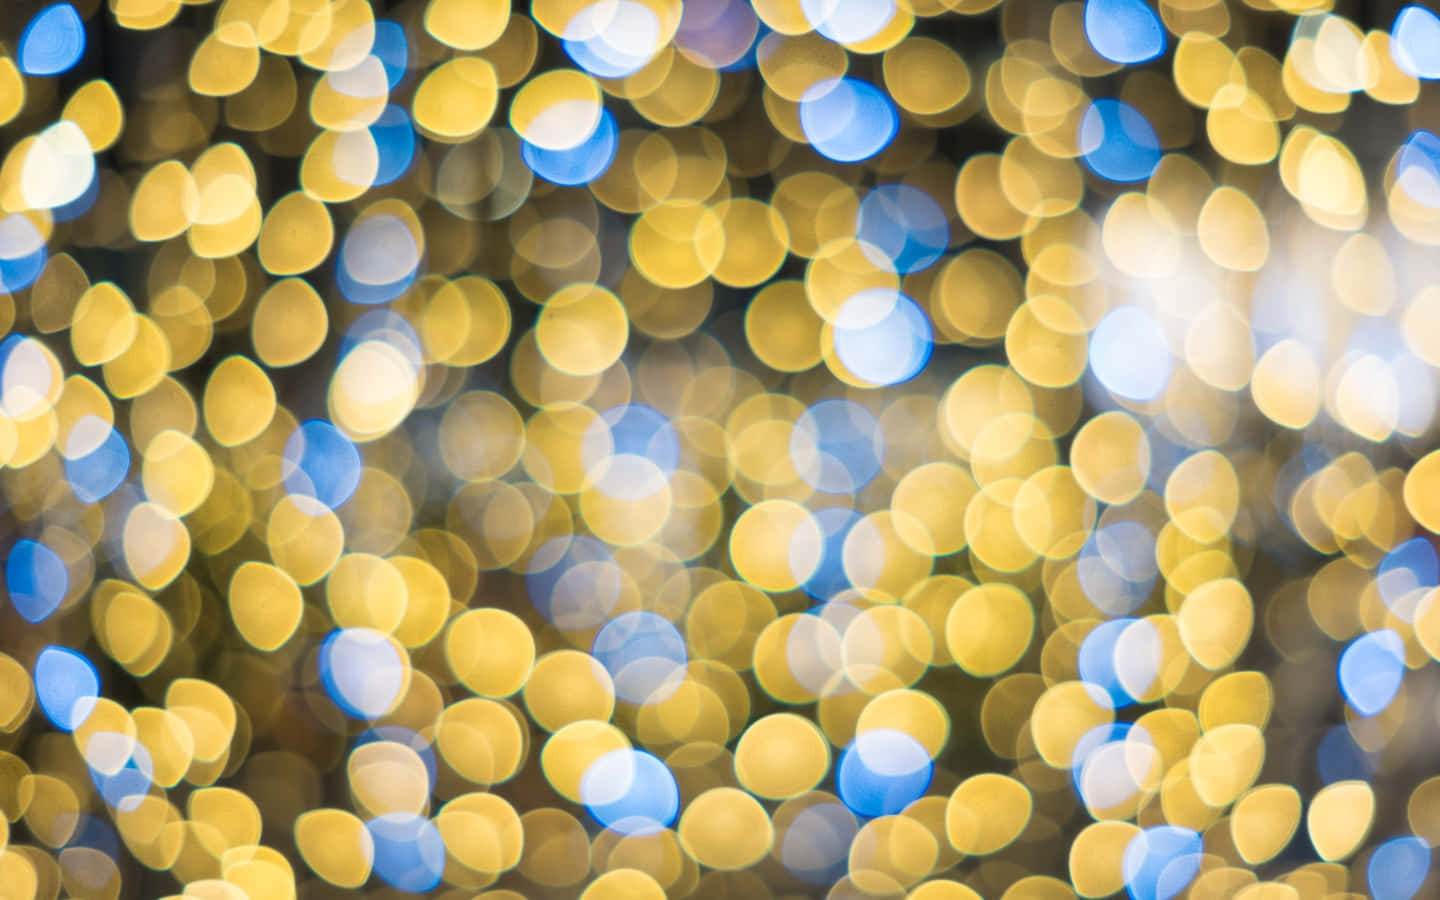 A serene image of a bokeh background, perfect for any desktop background